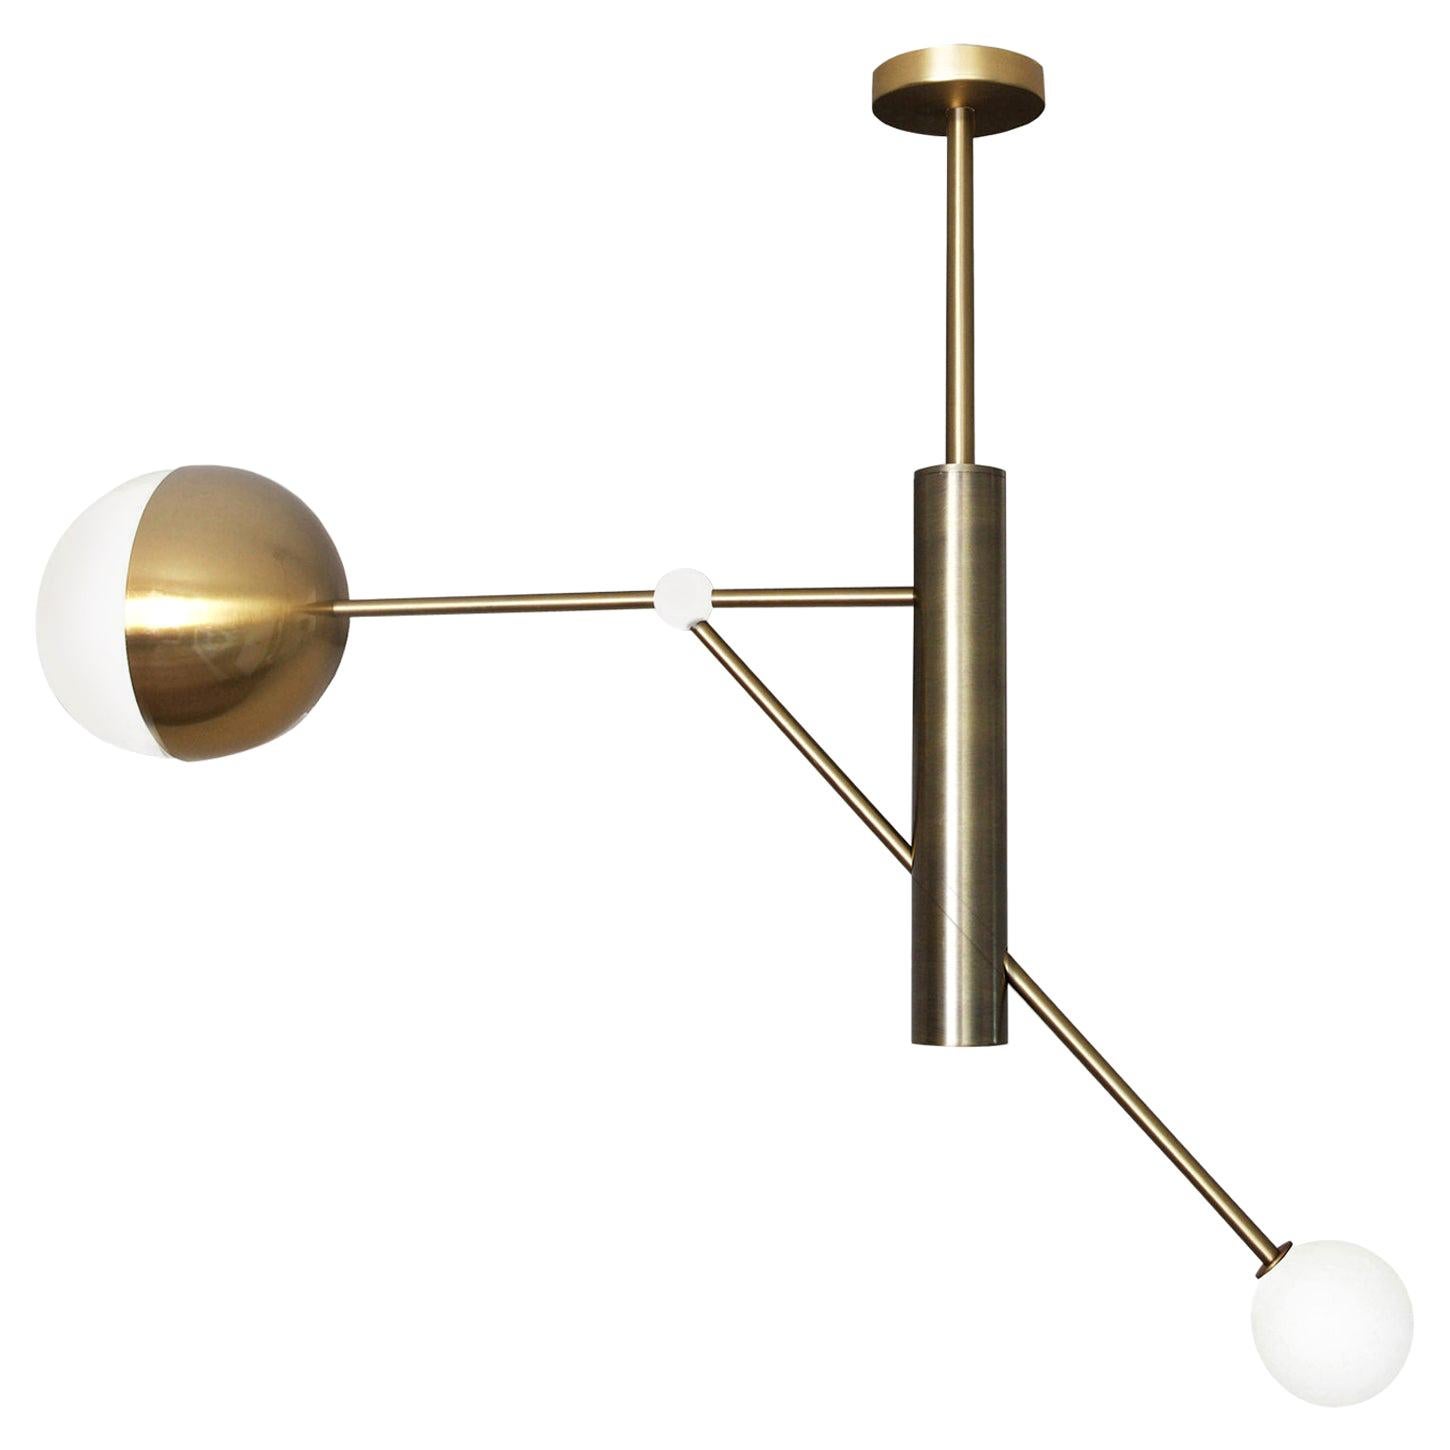 Brass Pole Dance Pendant Light by Square in Circle